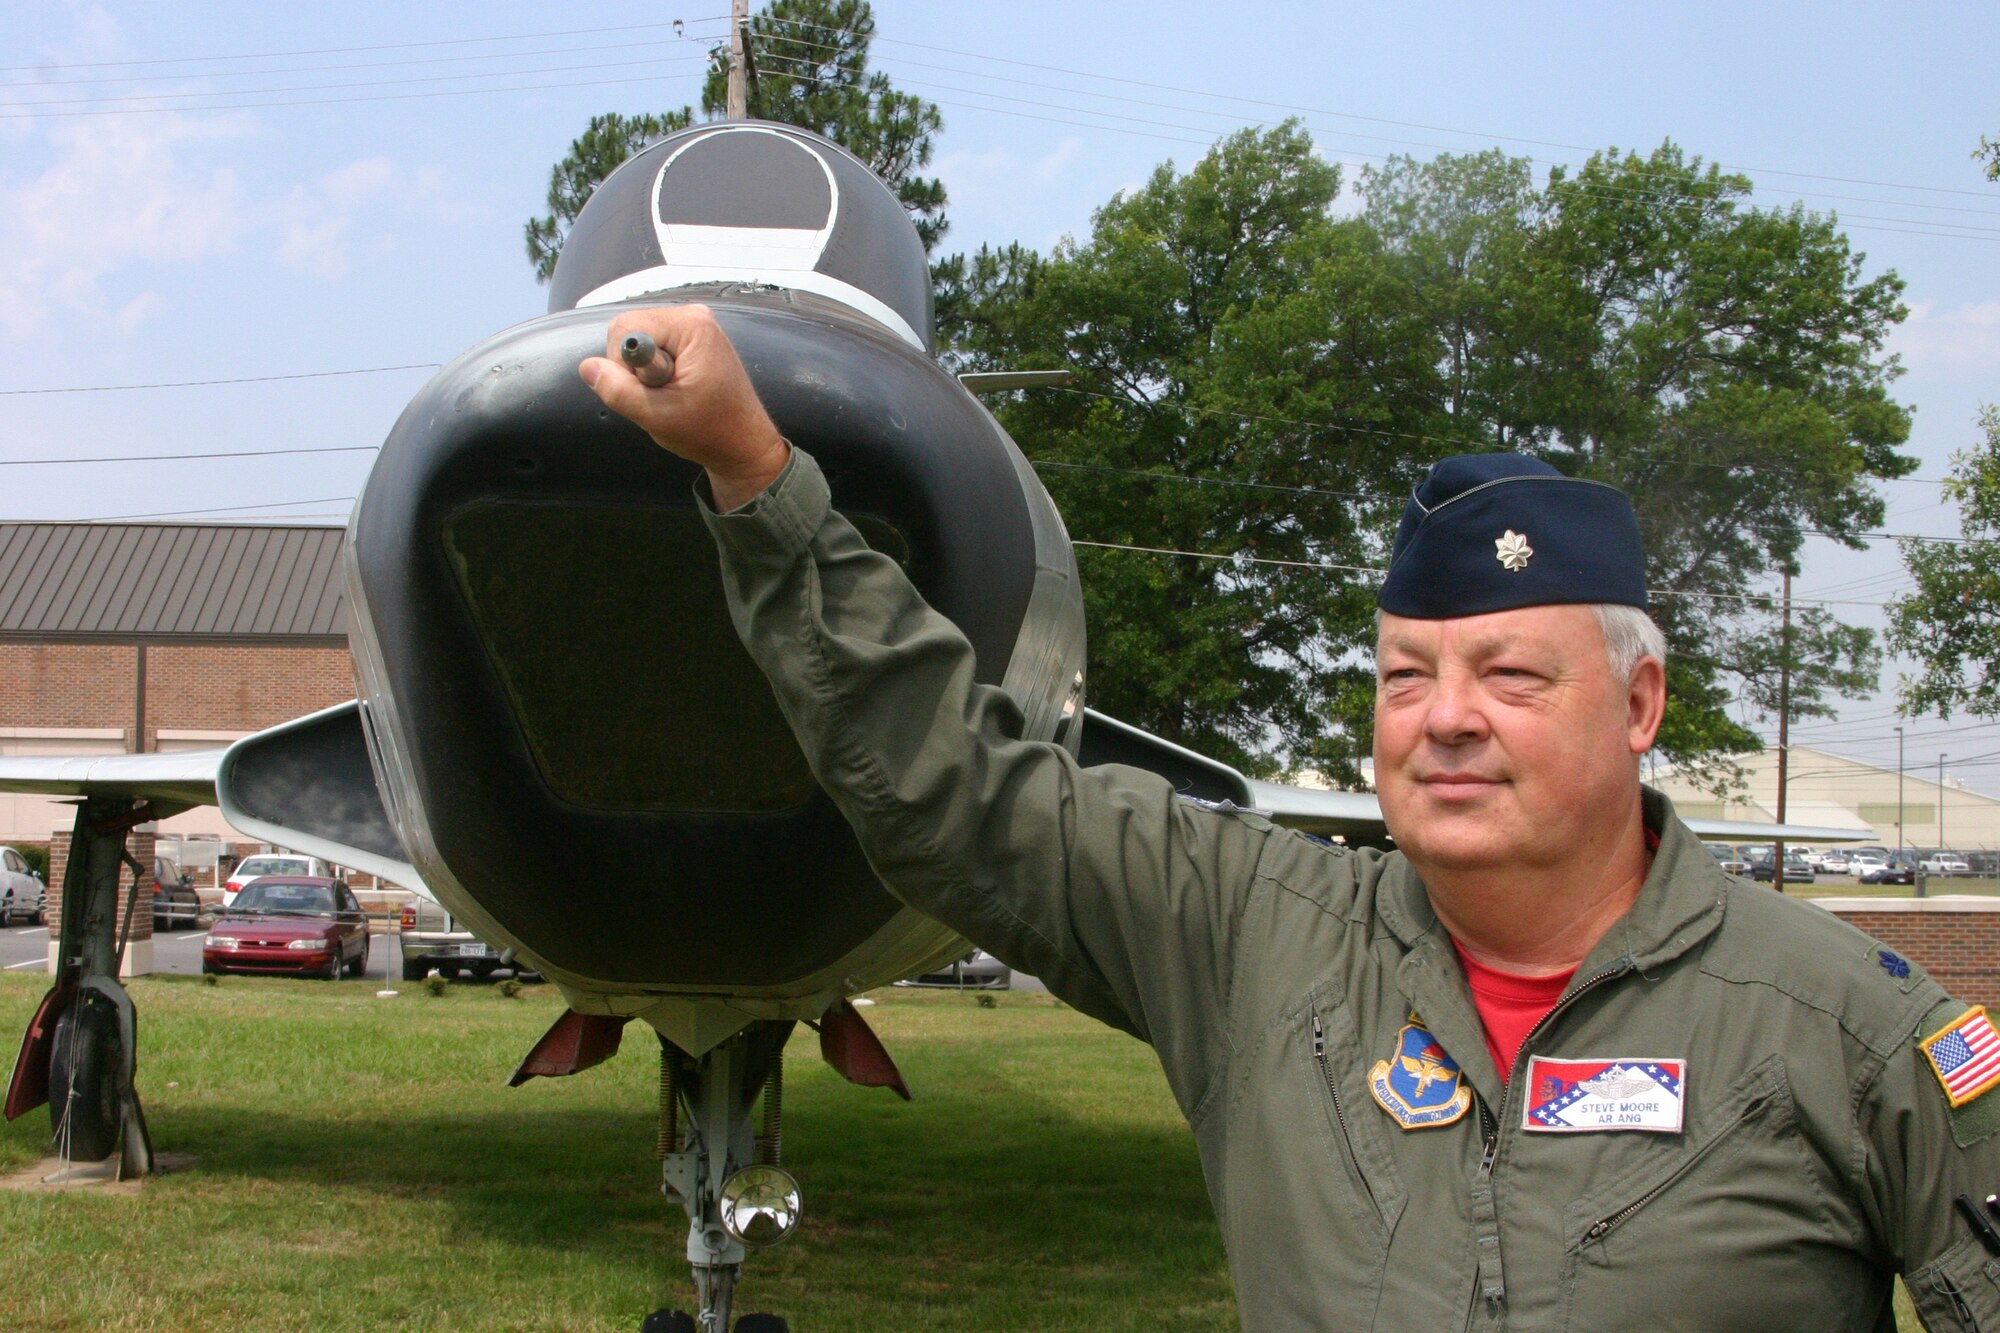 Lt. Col. Steve “Big Dog” Moore and one of the RF-101 Voodoo aircraft he flew during a 36-year Air National Guard career. (U.S. Air Force photo by Master Sgt. Bob Oldham)